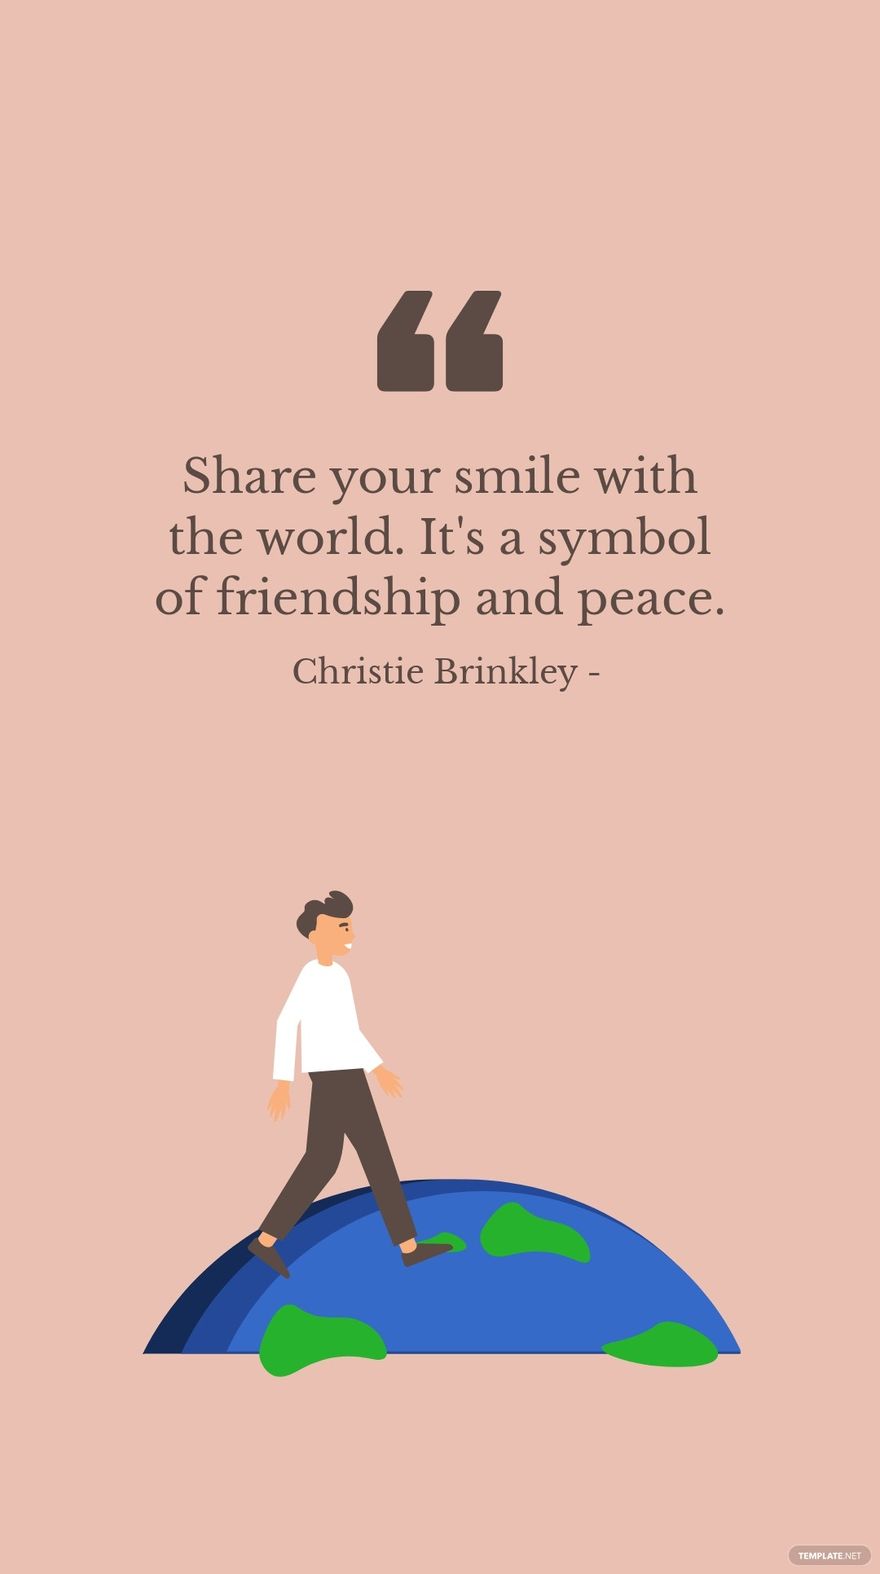 Christie Brinkley - Share your smile with the world. It's a symbol of friendship and peace.